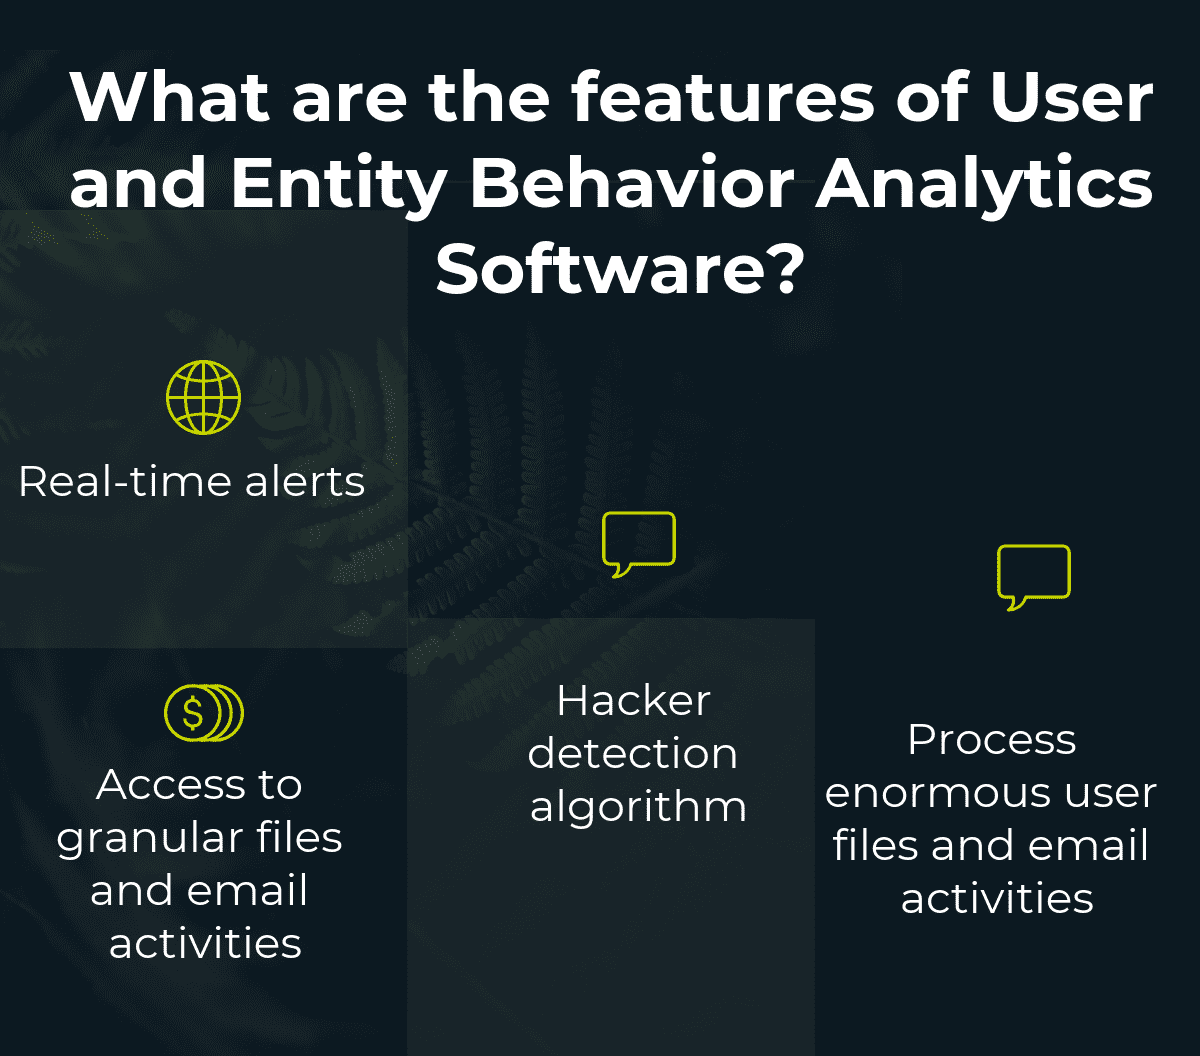 What are the features of User and Entity Behavior Analytics Software?